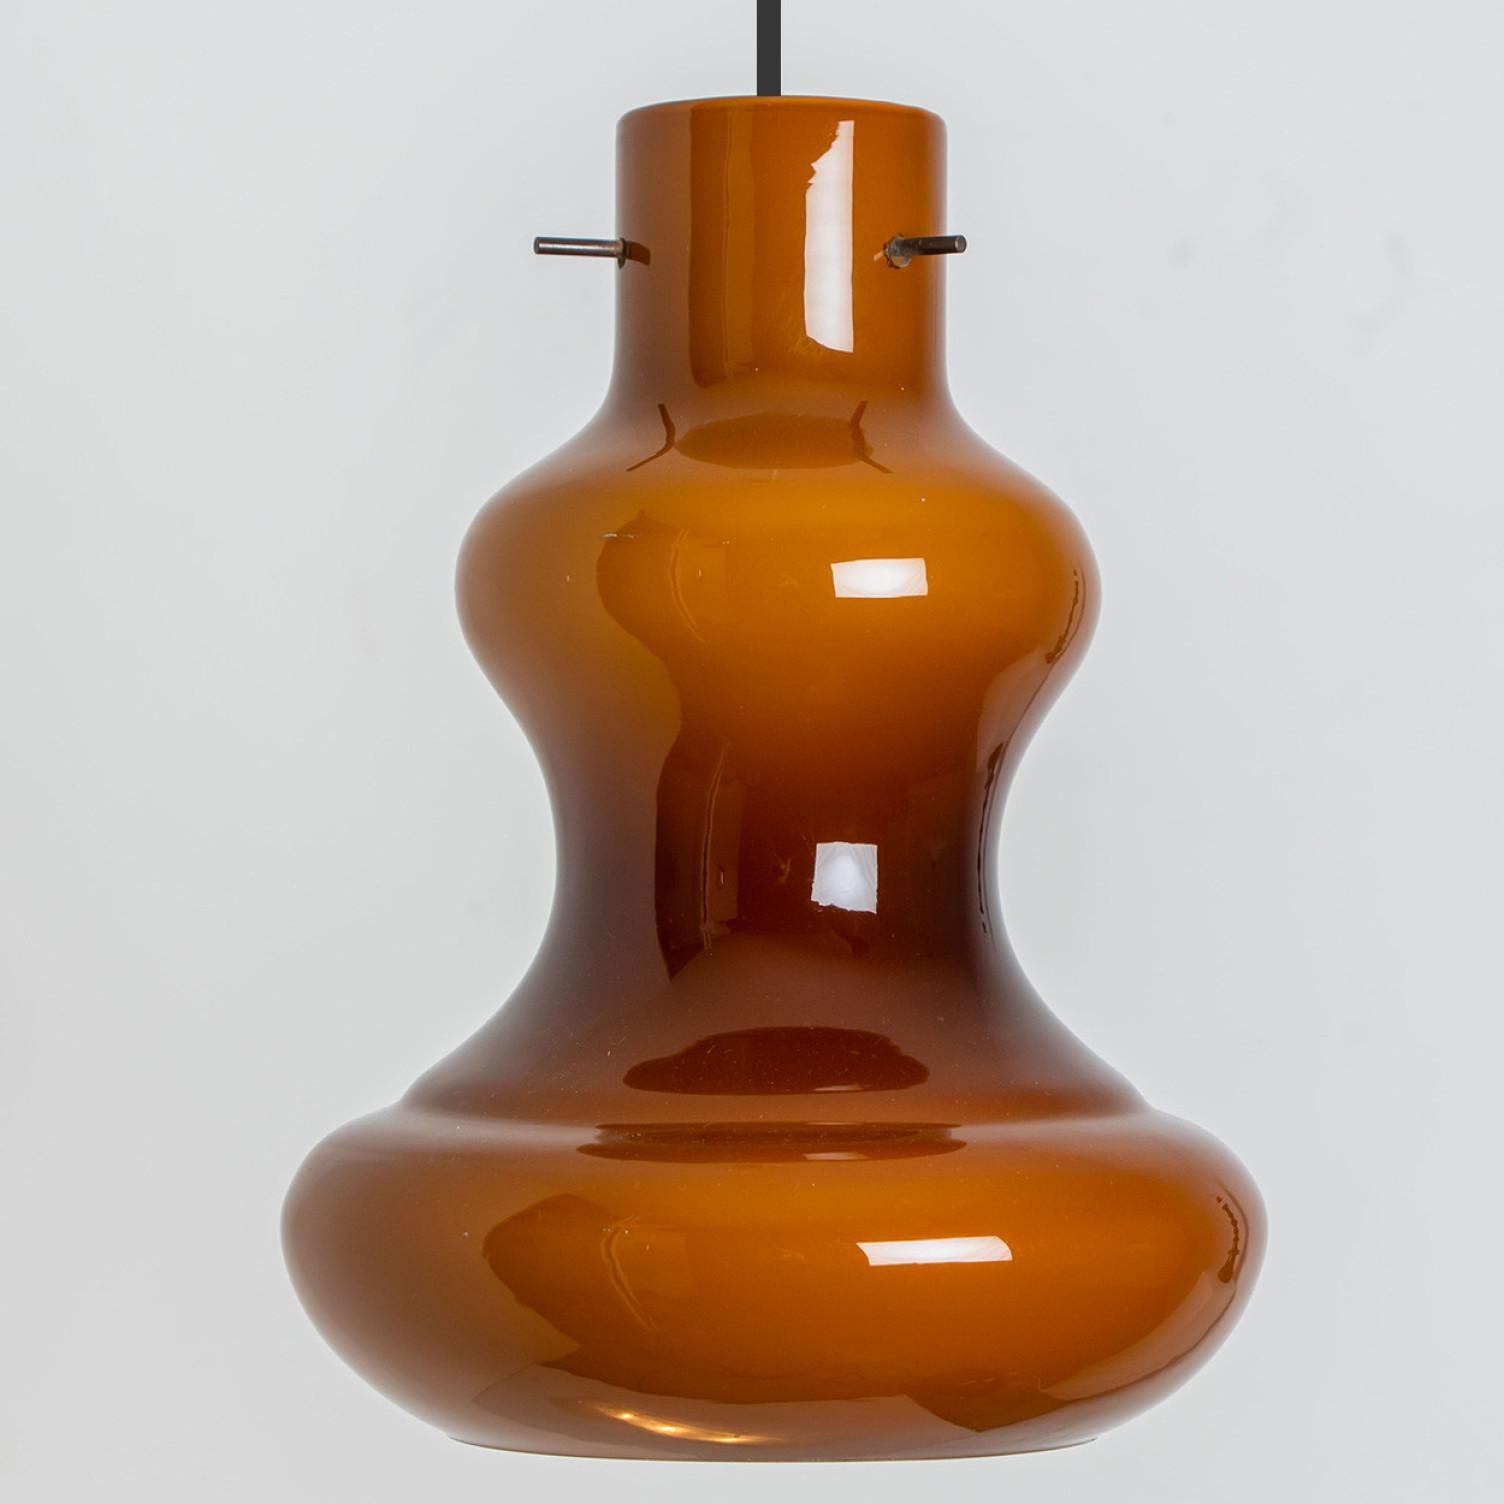 Other Set of 3 Murano Glass Pendant Lights by Massimo Vignelli for Venini, 1960 For Sale